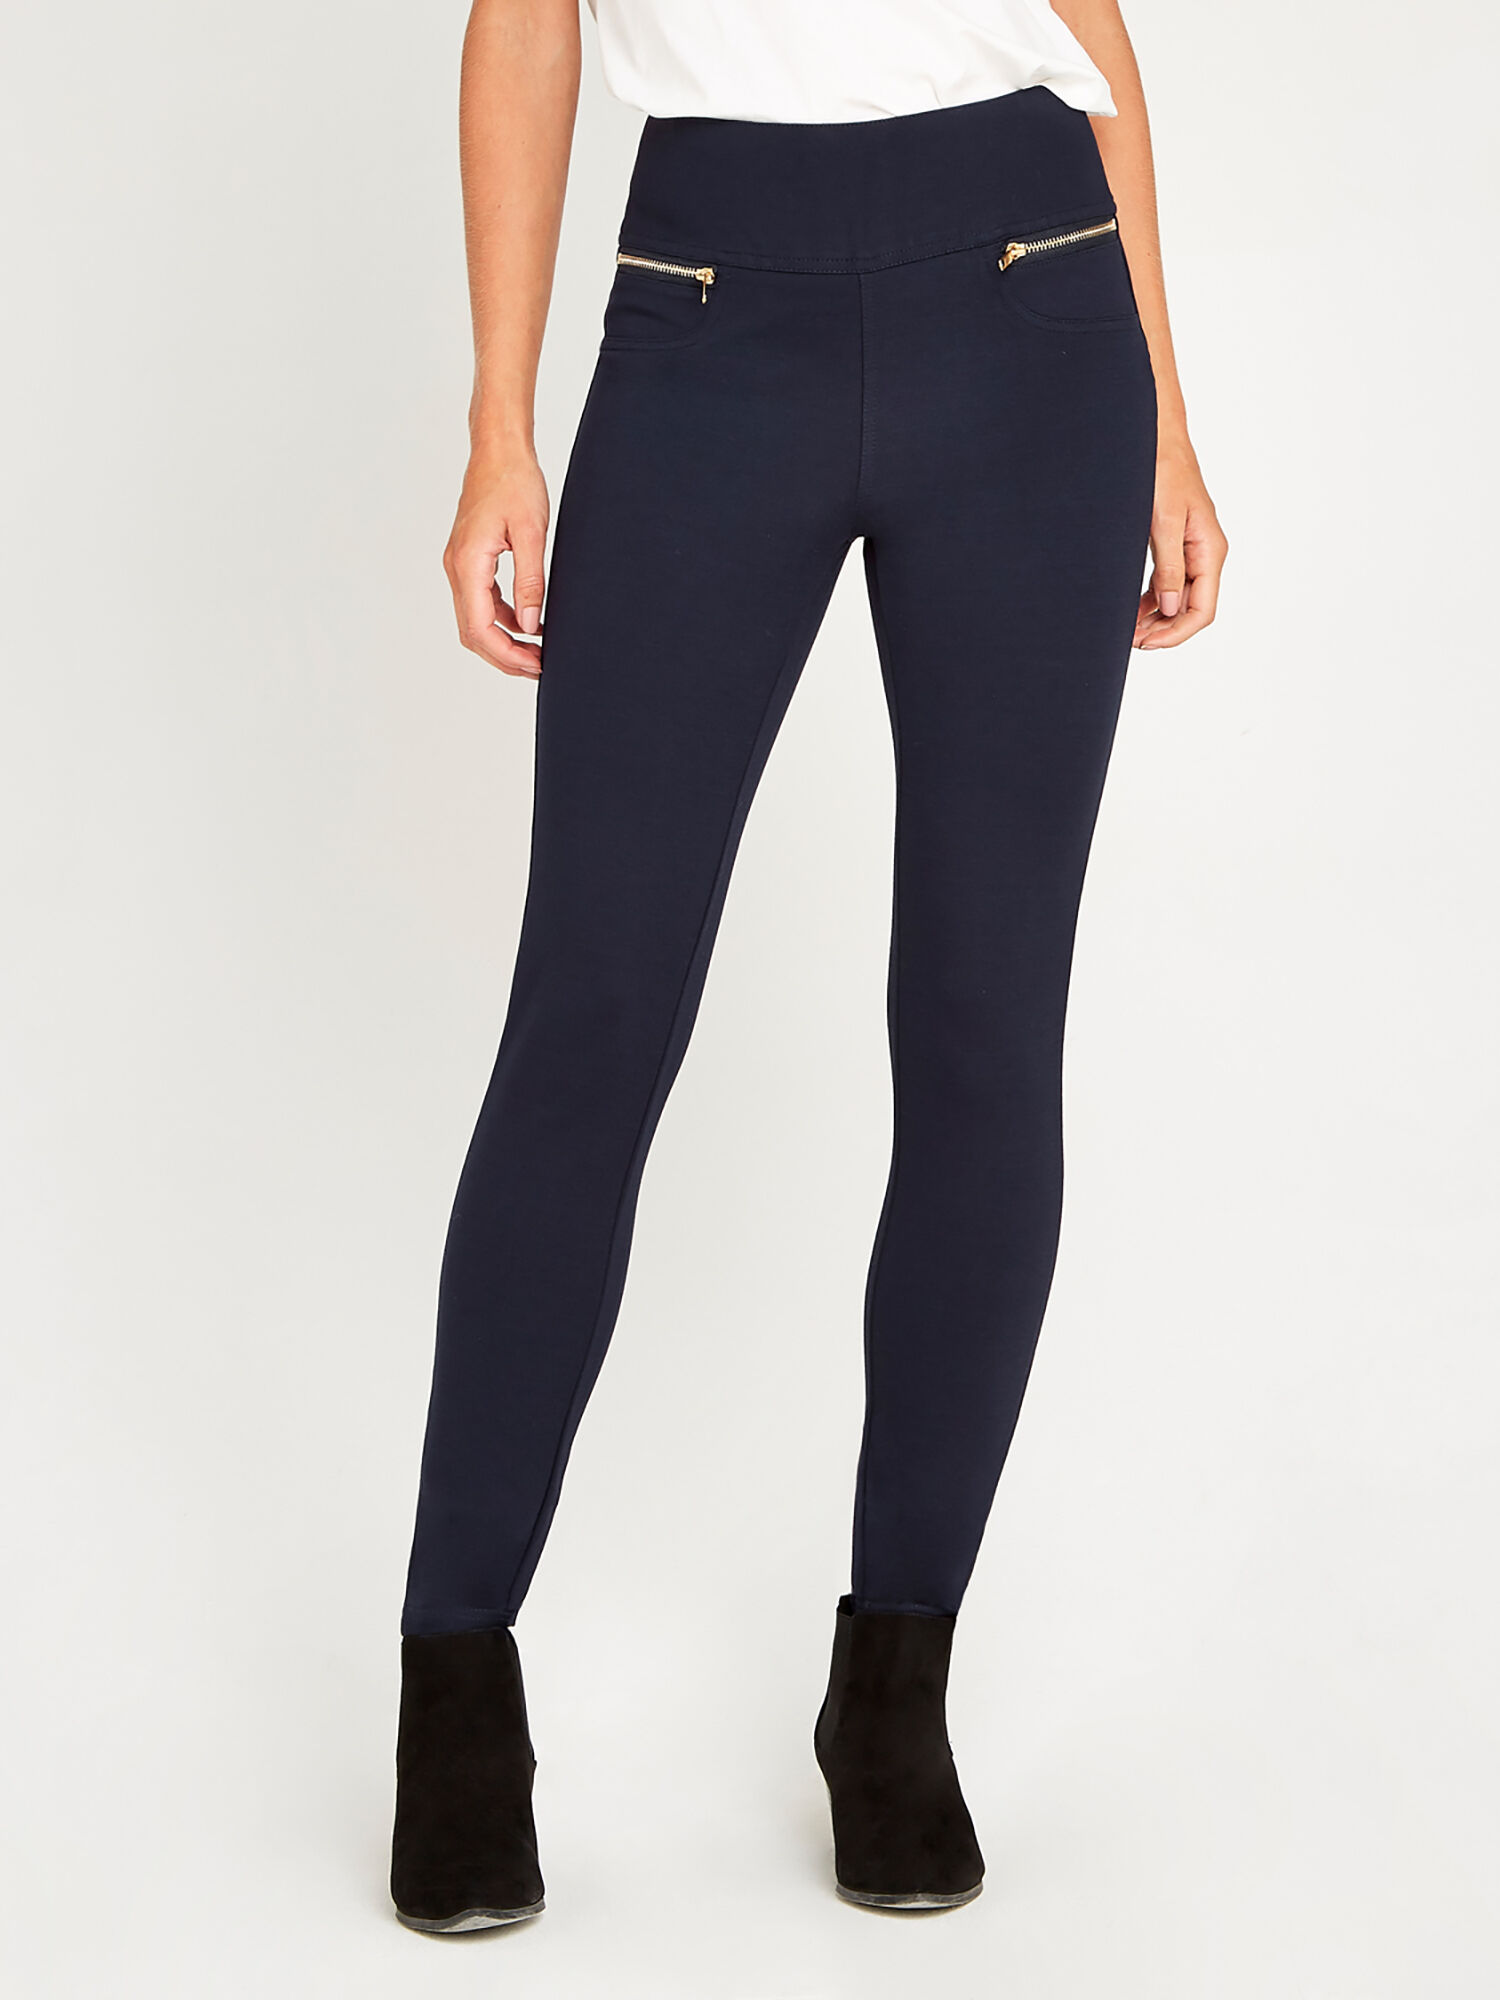 Zip Detail Ponte Trousers | Apricot Clothing